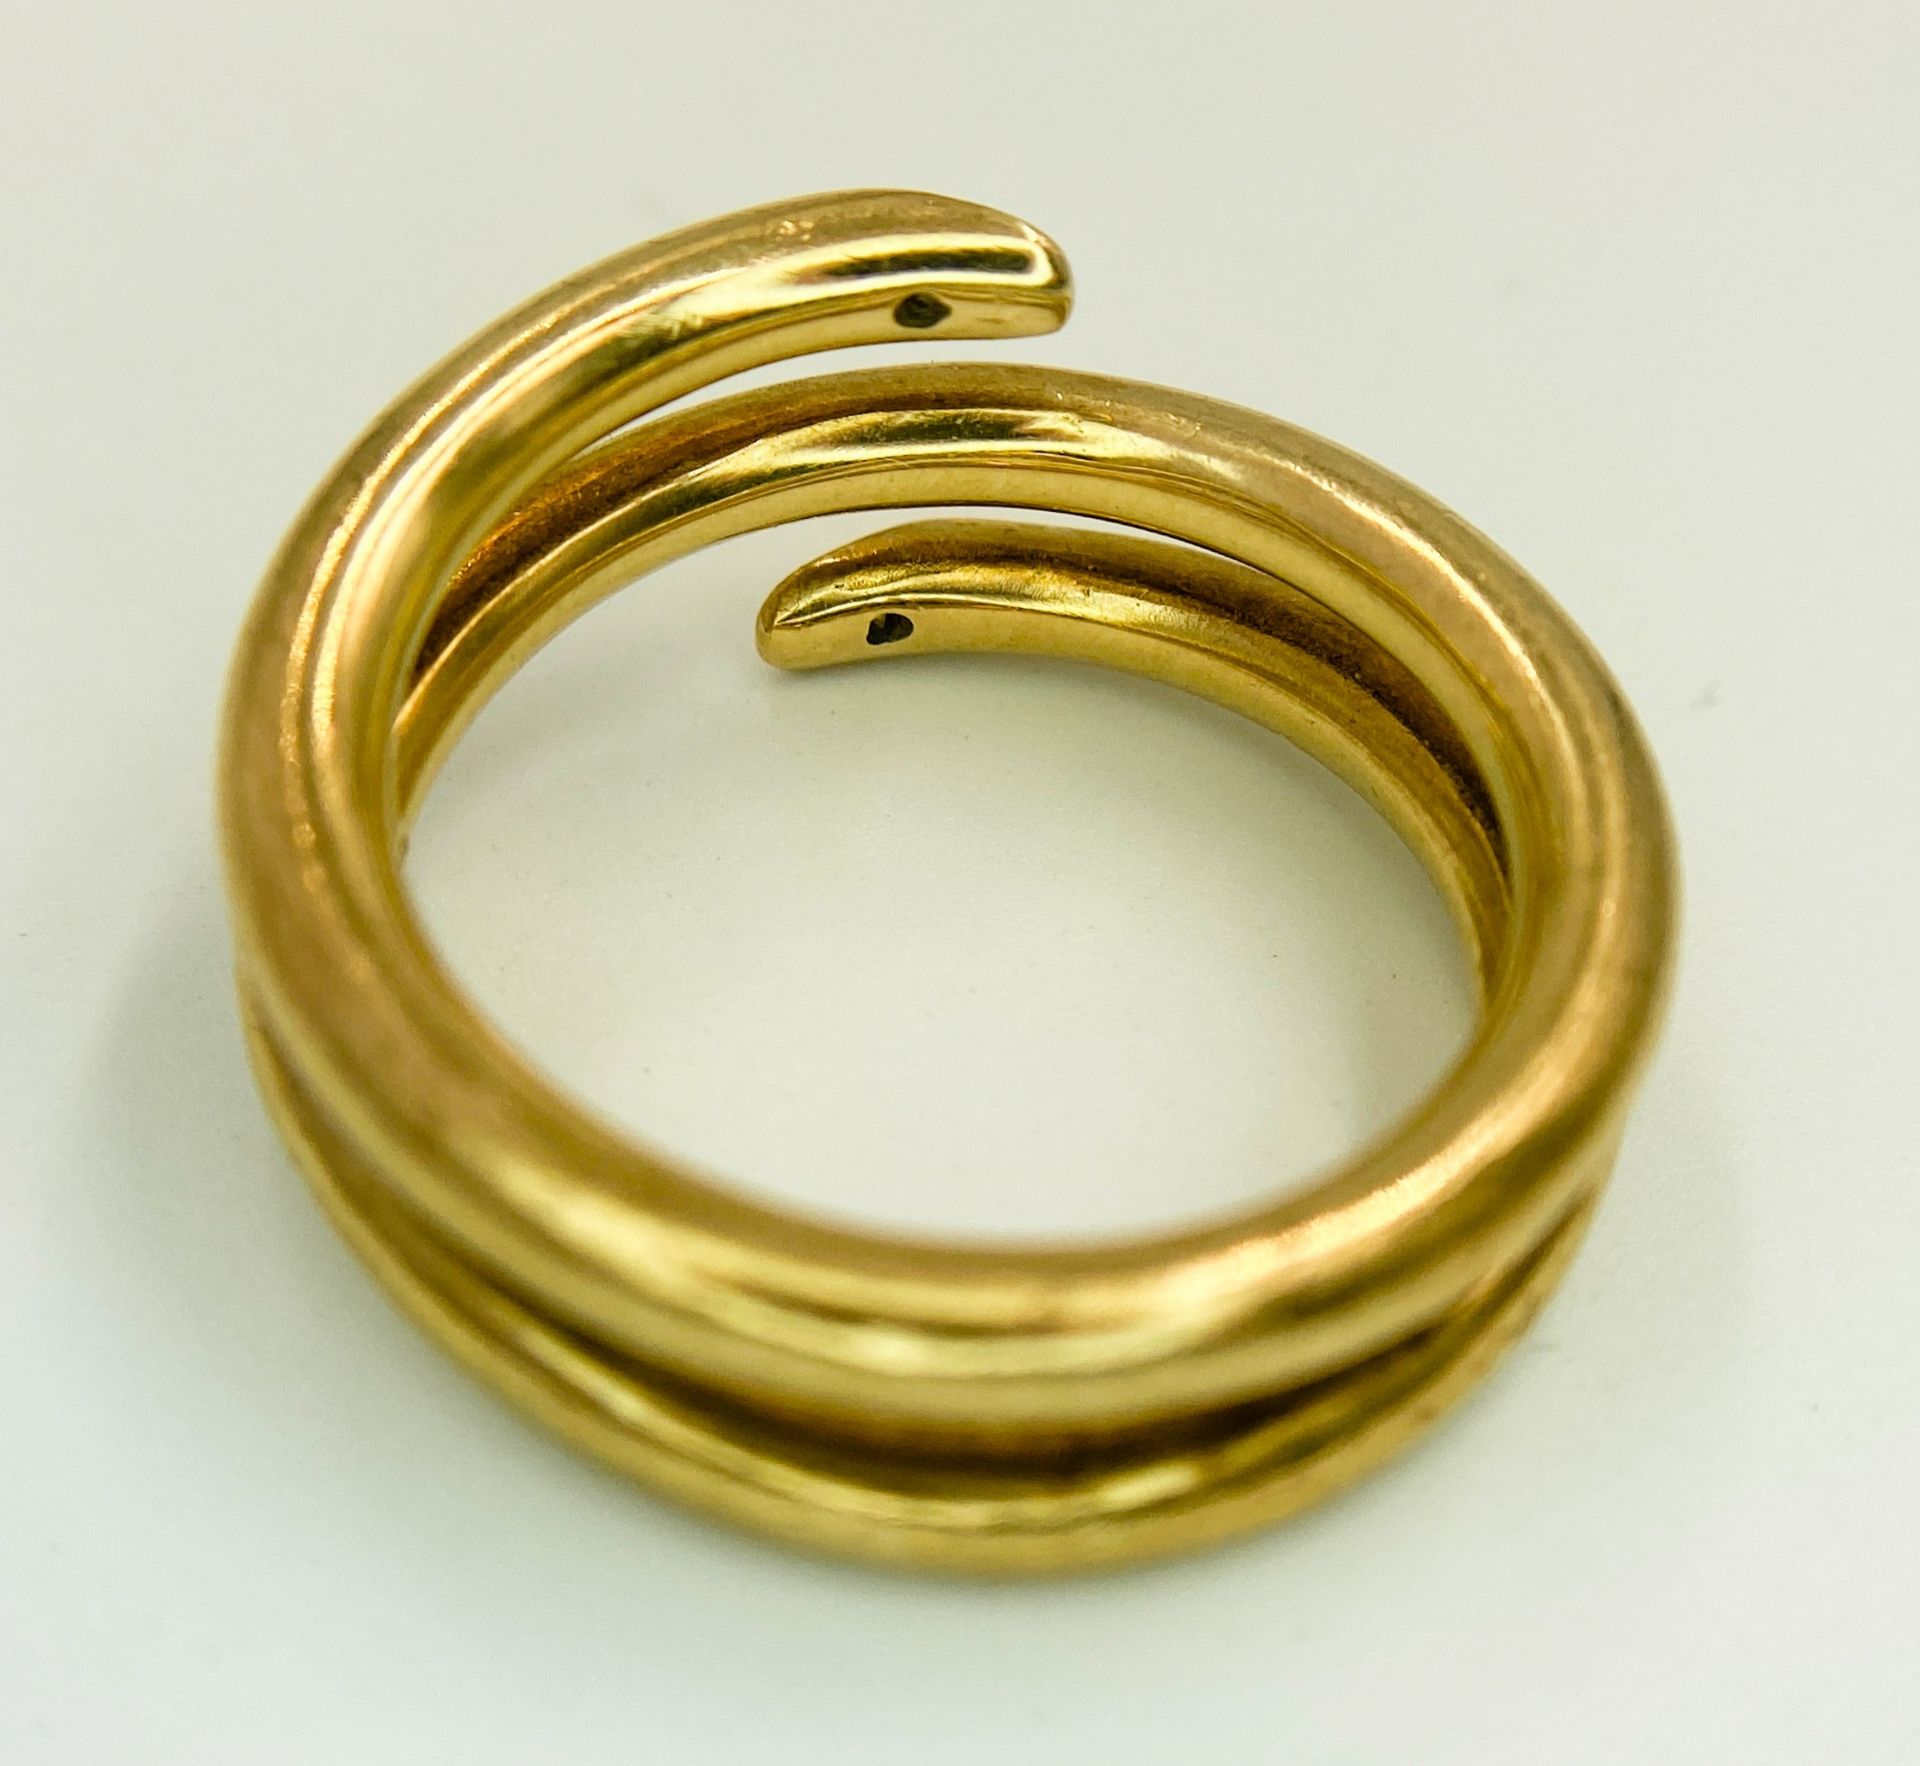 A 9K YELLOW GOLD, SERPENT STYLE DIAMOND BAND RING. 10G. SIZE T. - Image 4 of 6